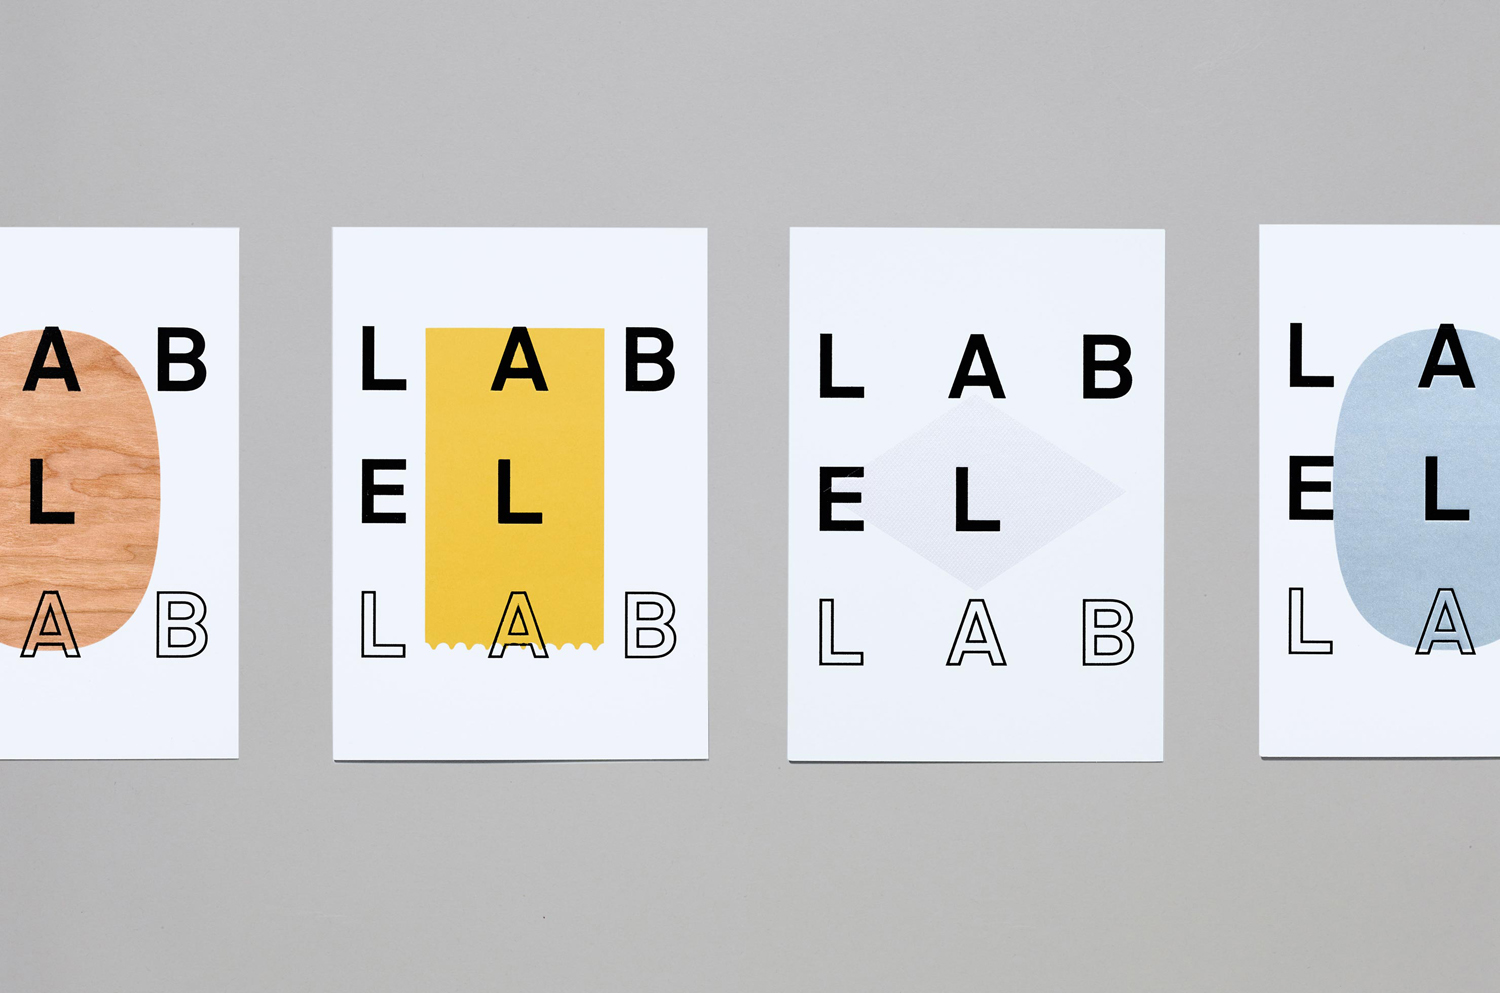 Logotype and invitation by TM for Label Lab, The Forum for Label and Packaging Innovation, hosted by Arconvert.